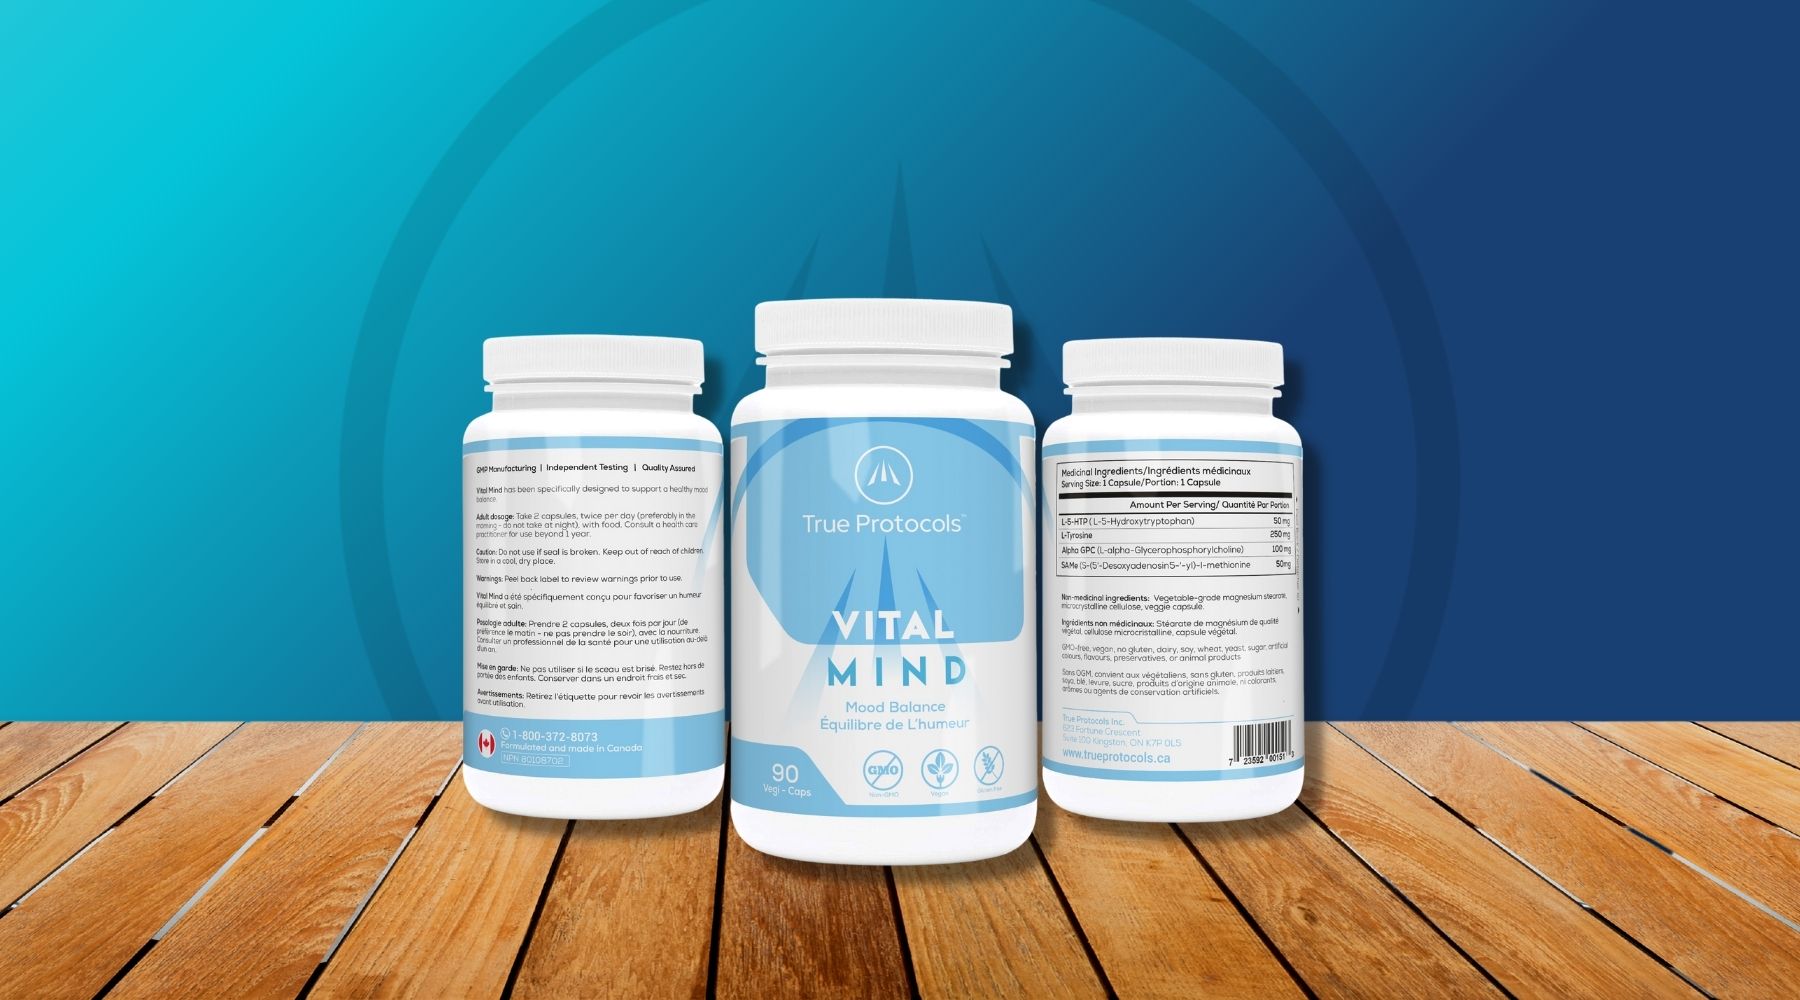 Launch of the Vital Mind Supplement